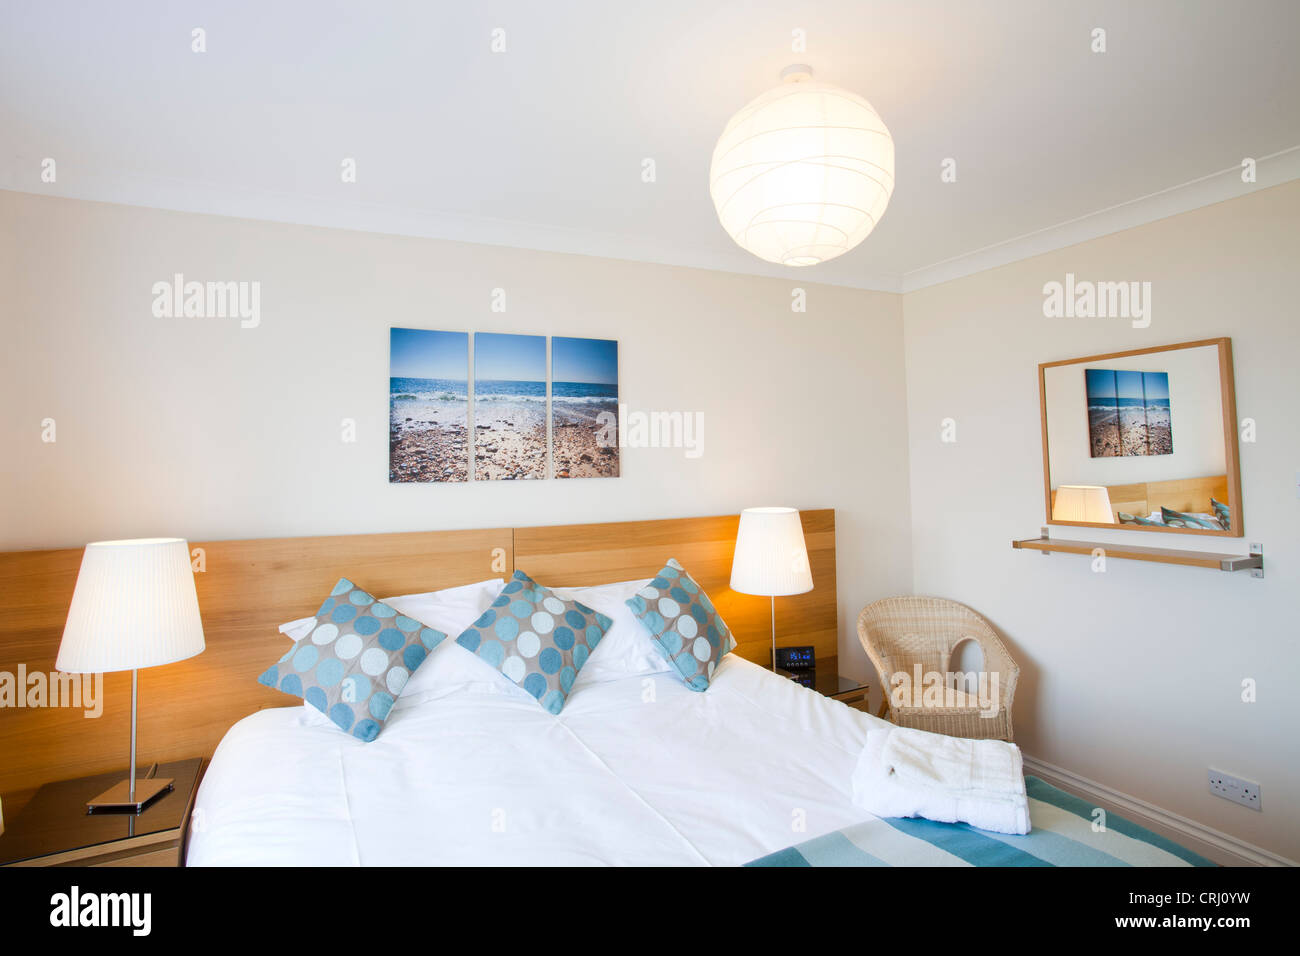 The Bedroom of a holiday cottage in Broadford, Isle of Skye, Scotland, UK. Stock Photo